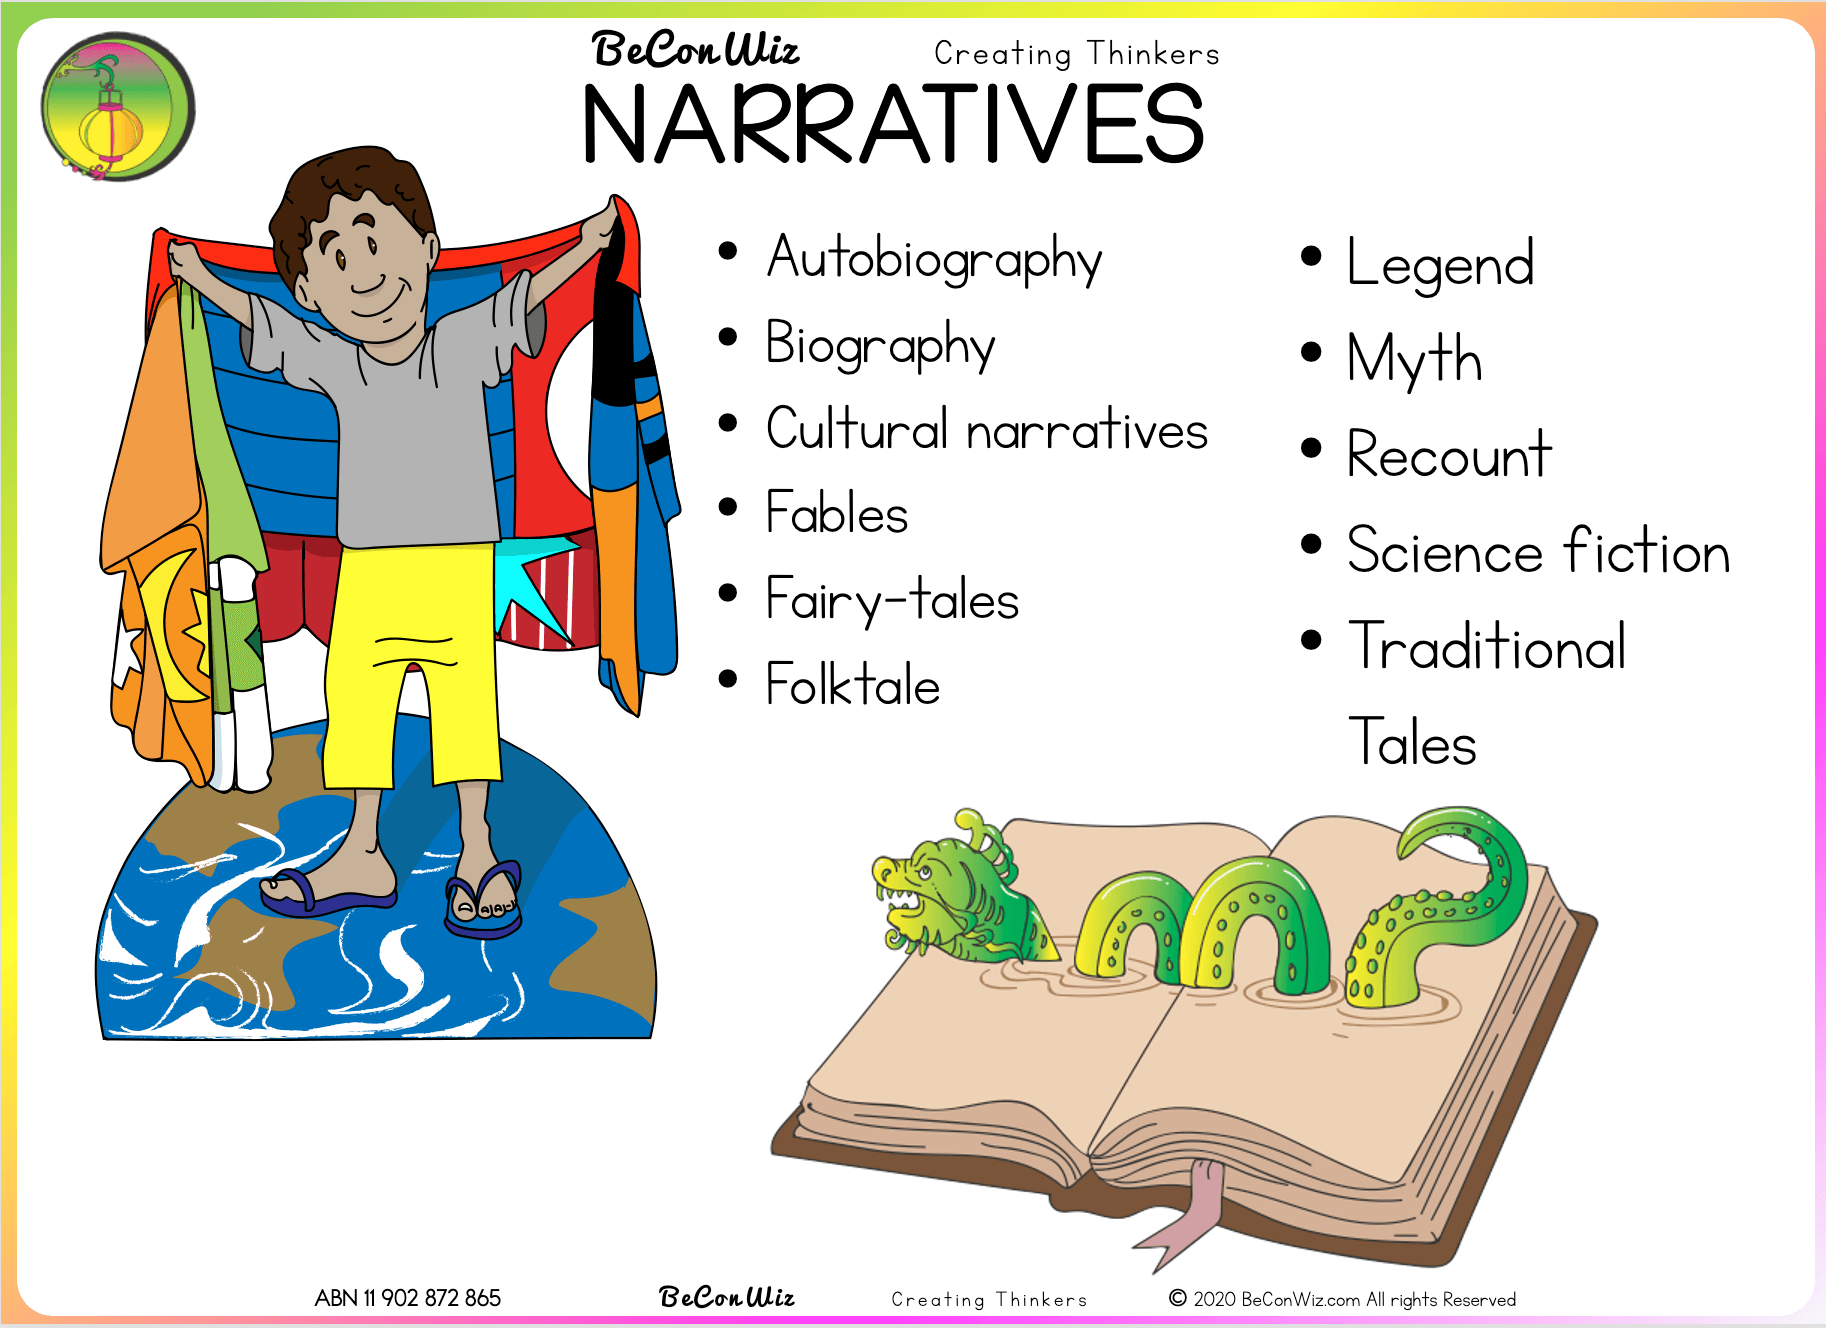 4 types of narrative writing